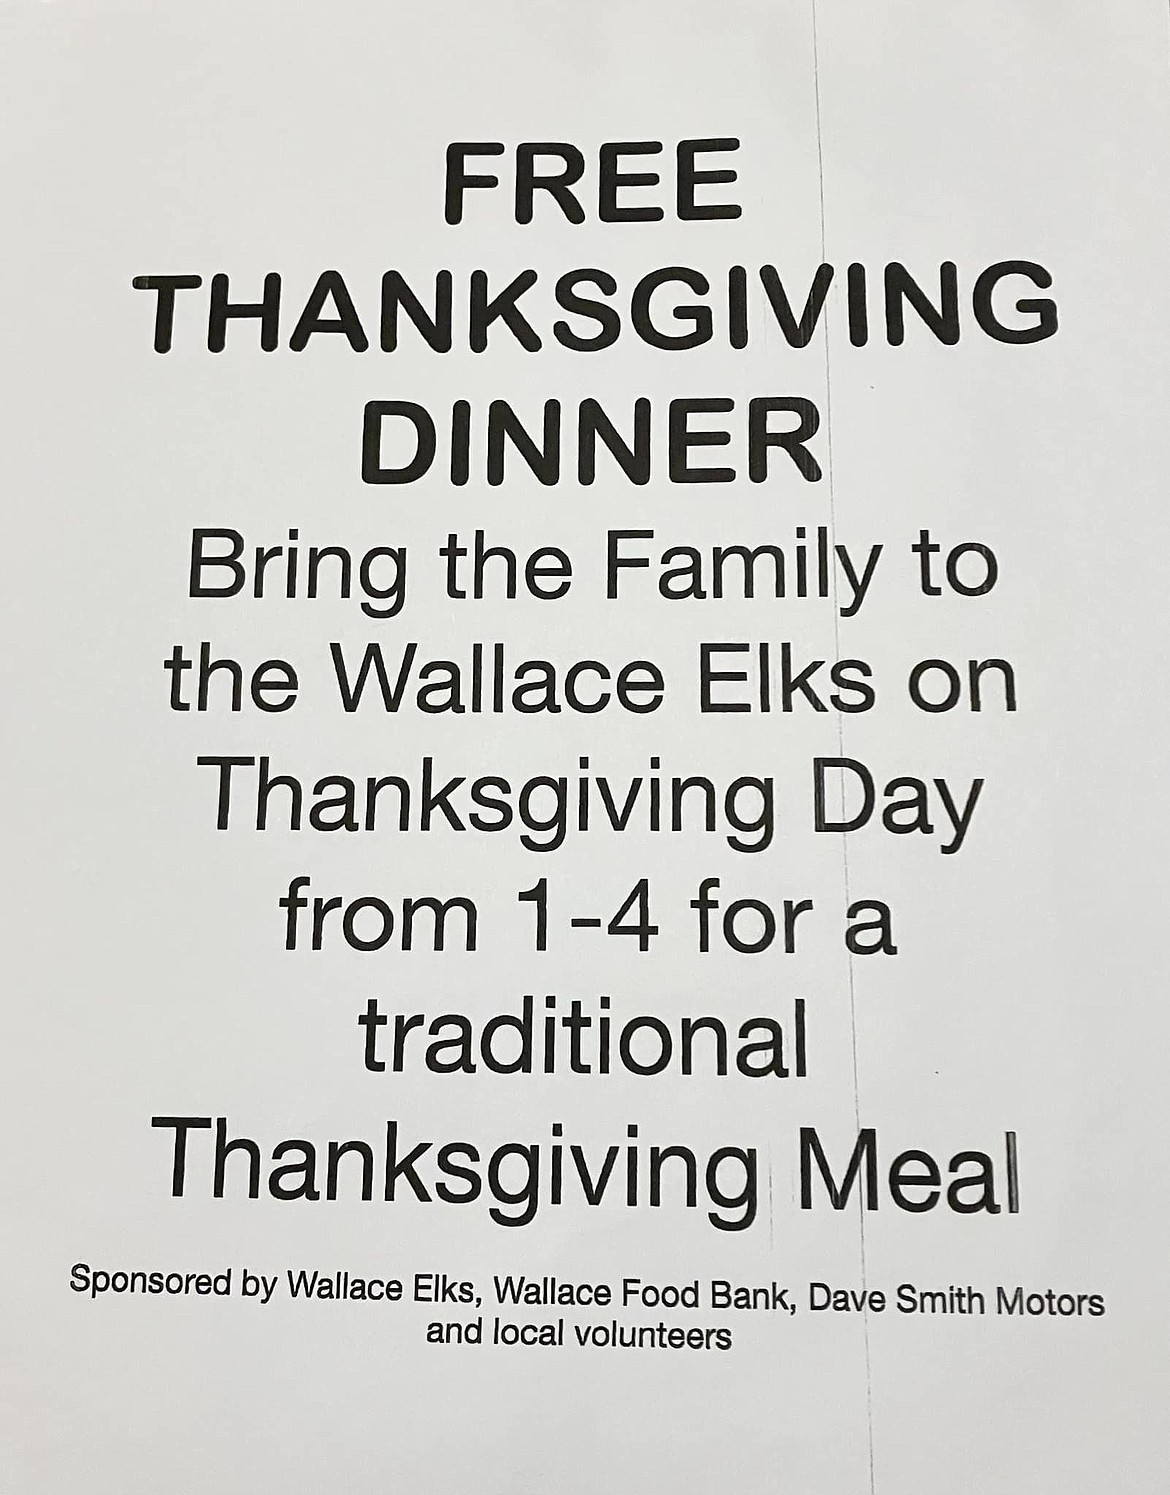 Free Thanksgiving dinners are being provided for people at the Wallace Elks Lodge on Nov. 23 from 1-4 p.m. The Wallace Food Bank is anticipating about 200 people to participate.